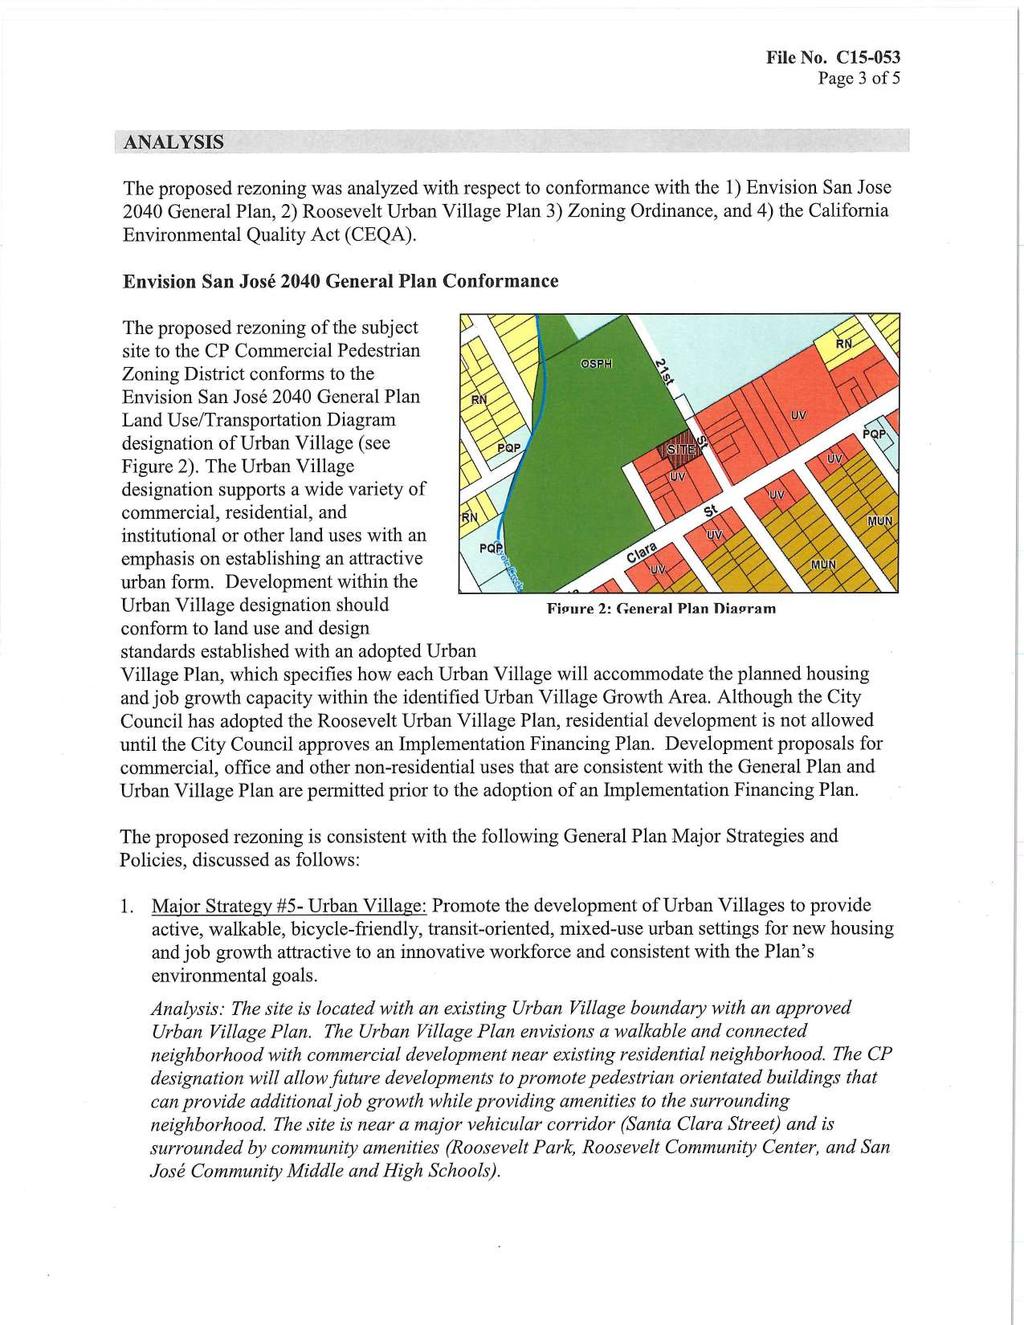 Page 3 of 5 ANALYSIS The proposed rezoning was analyzed with respect to conformance with the 1) Envision San Jose 2040 General Plan, 2) Roosevelt Urban Village Plan 3) Zoning Ordinance, and 4) the